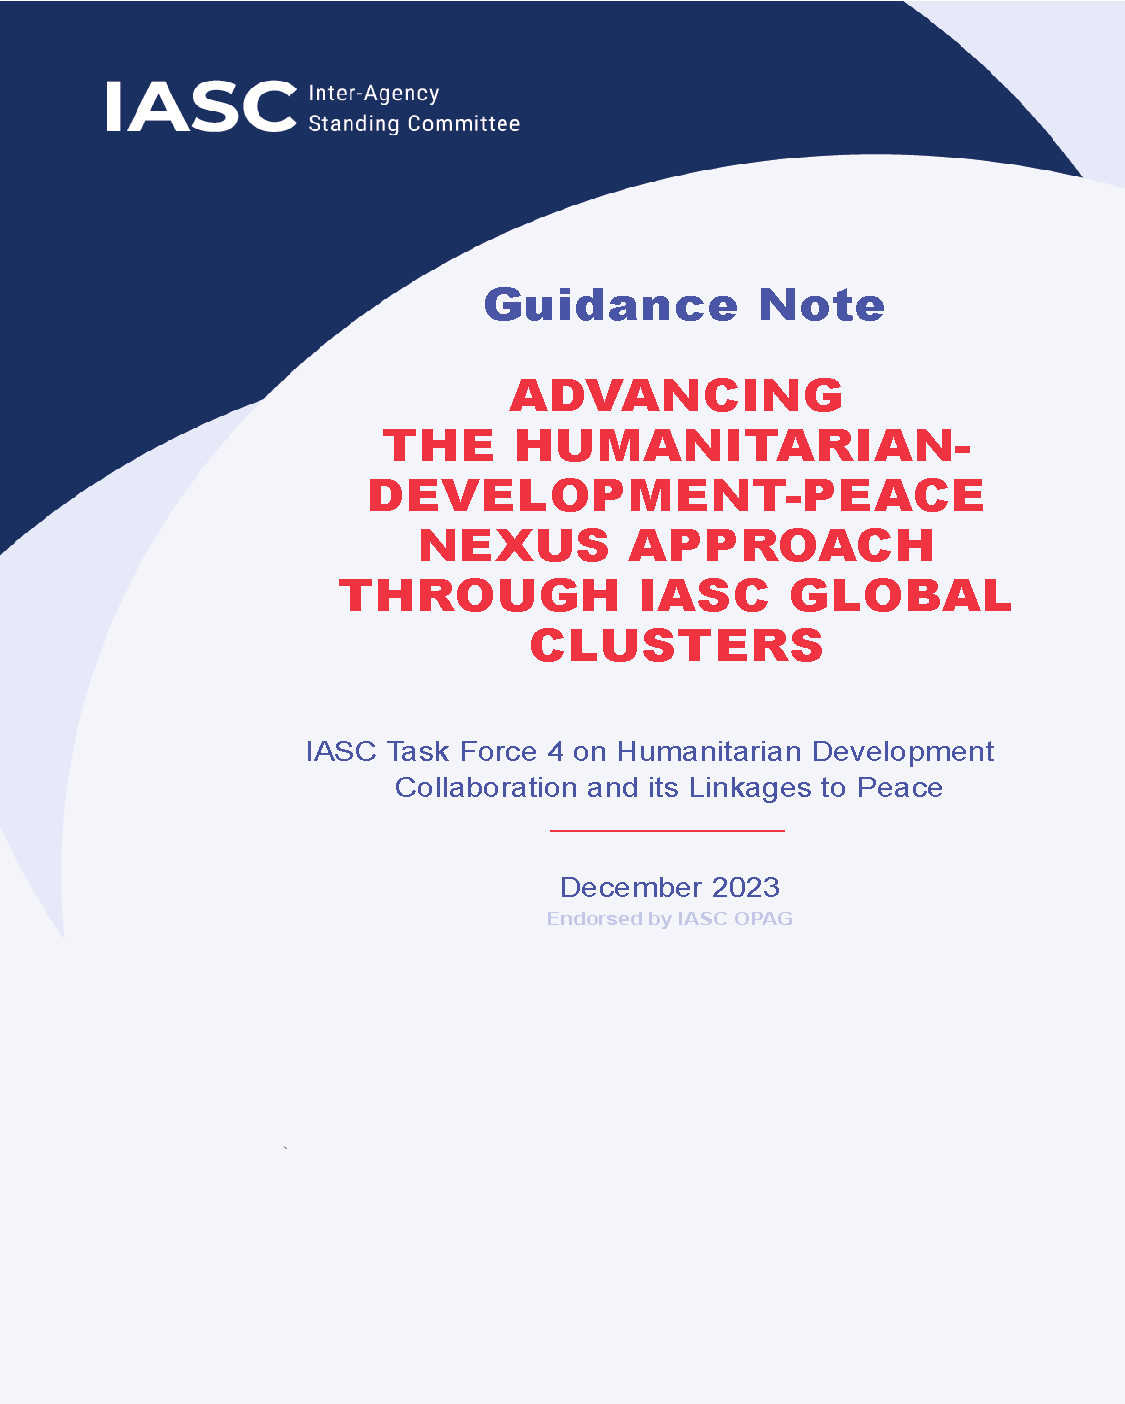 Cover page for Advancing the Humanitarian-Development-Peace Nexus approach through IASC Global Clusters